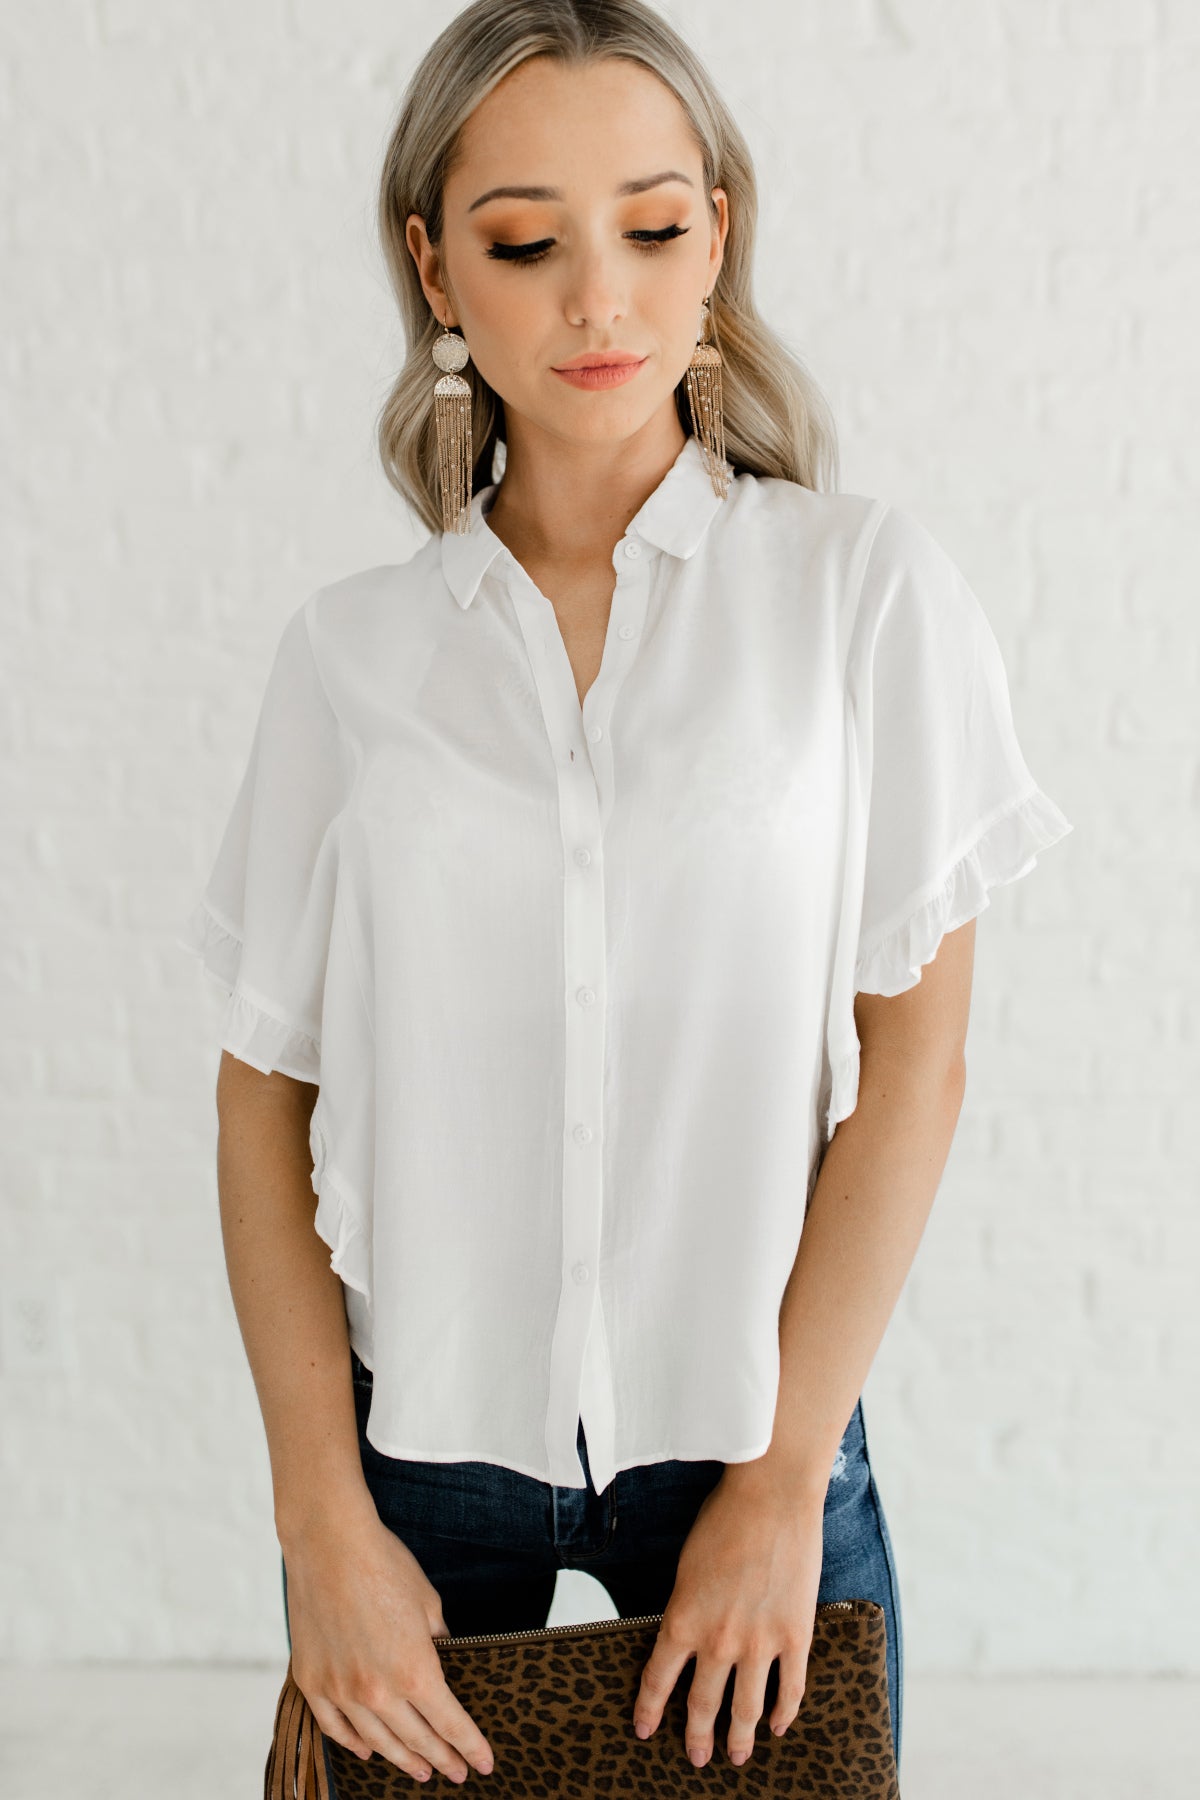 sheer white button up blouse